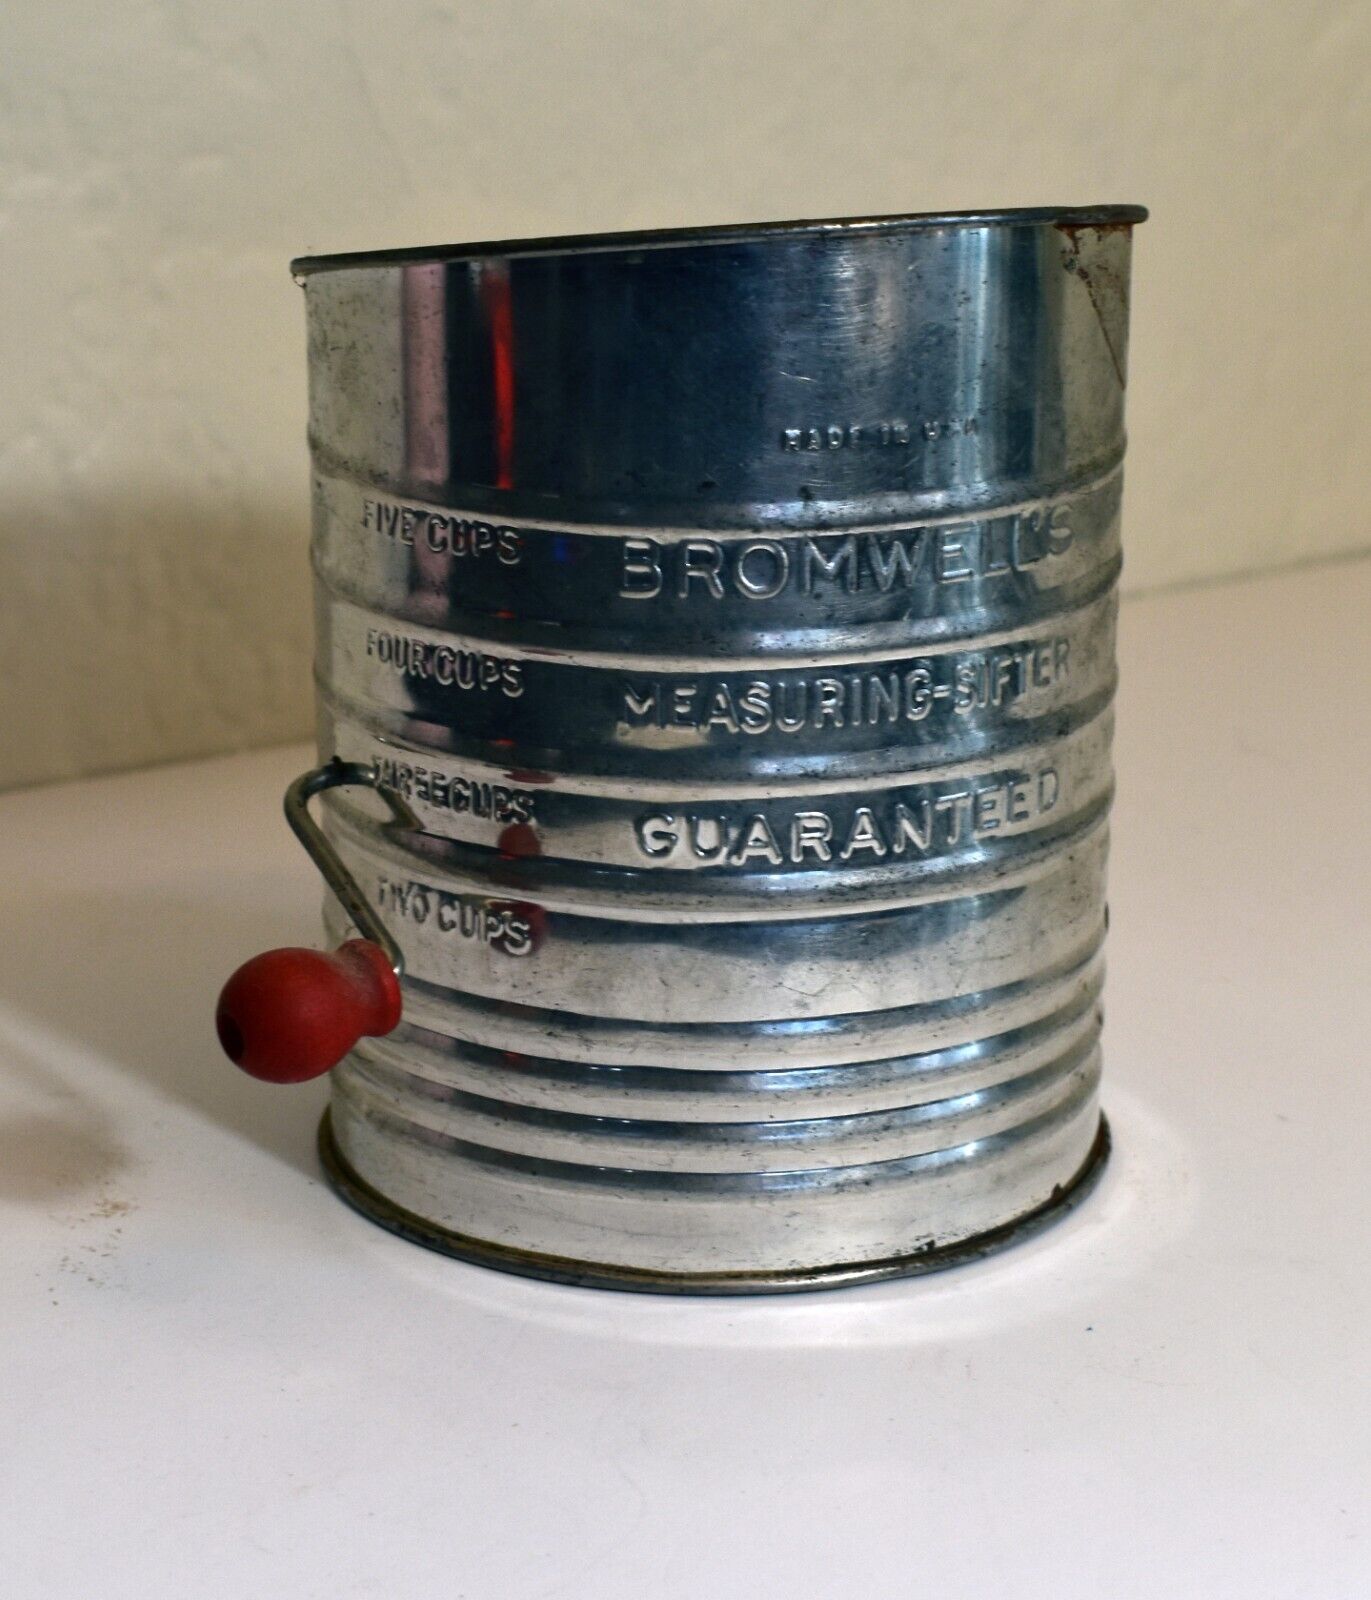 U.S.A. Made Vintage Bromwell\'s Measuring-Sifter 5 Cups Flour Sifter wood handle